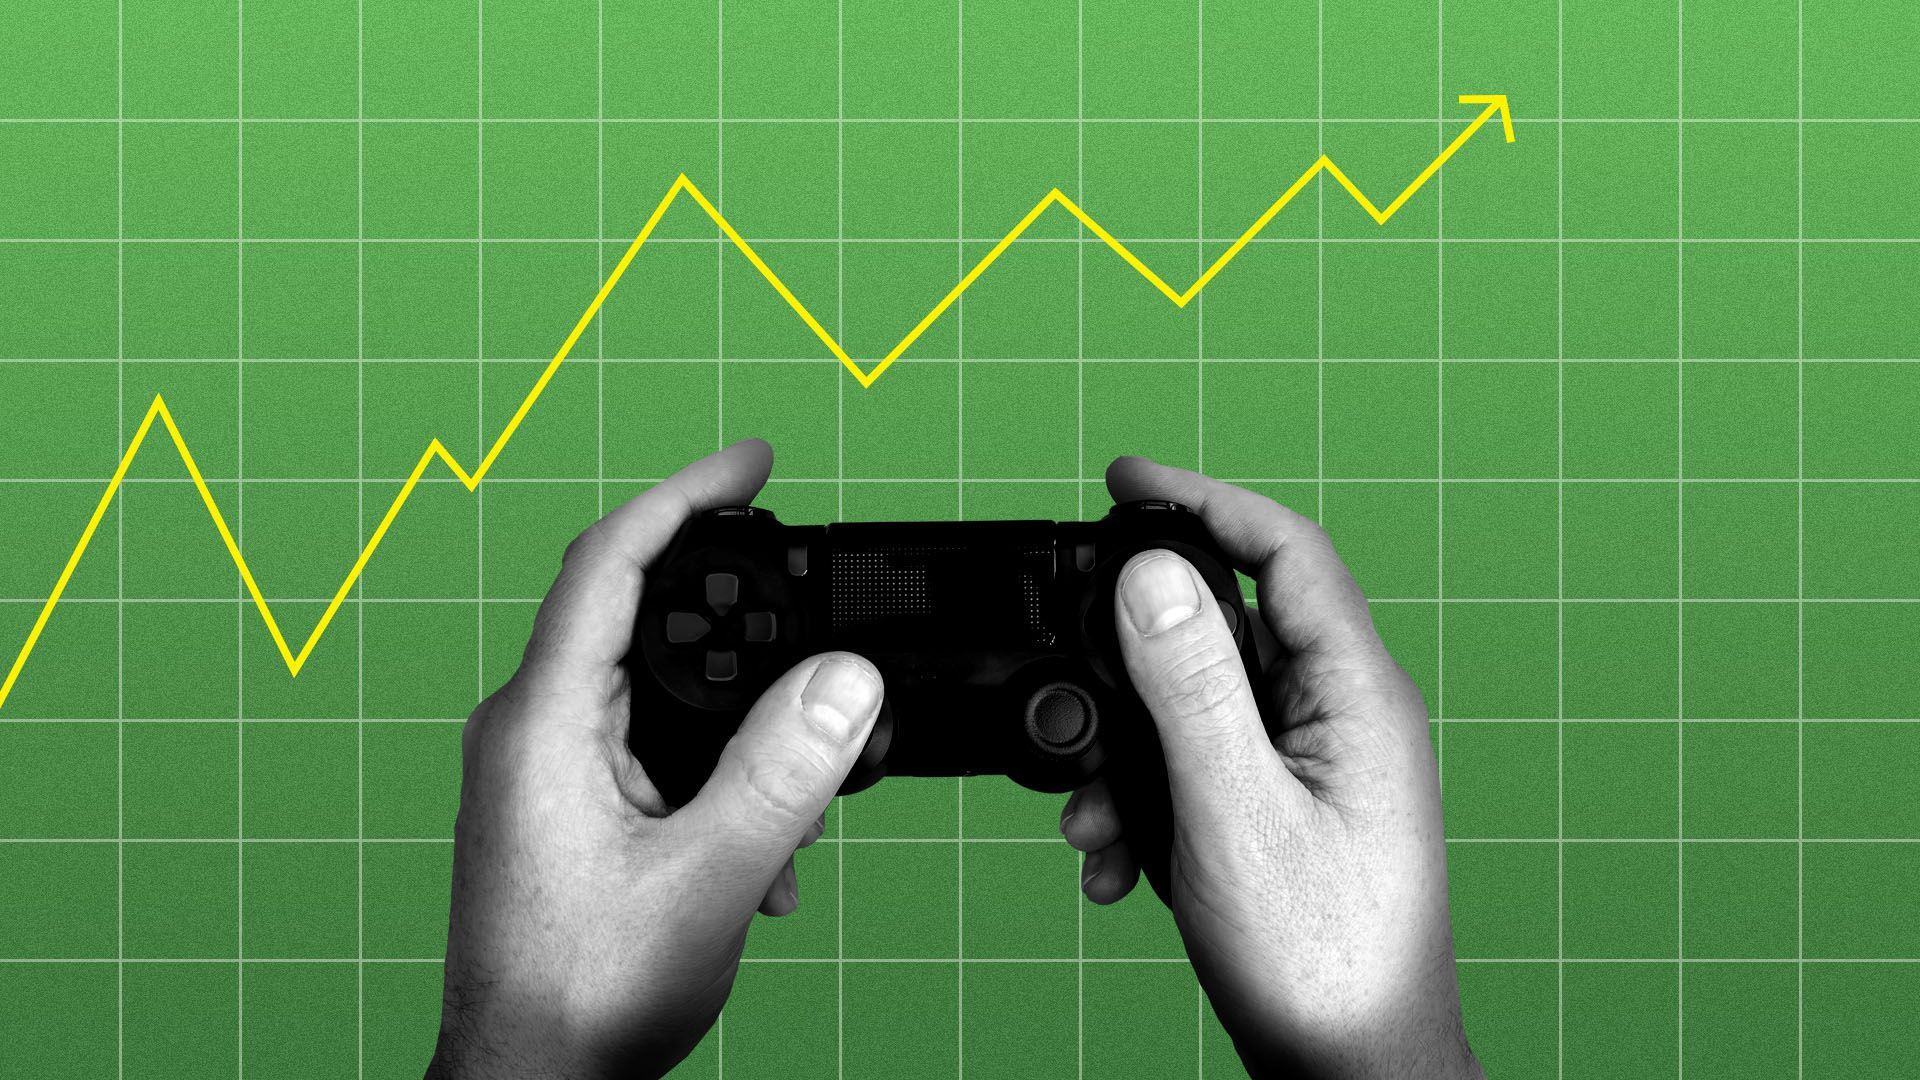 Illustration of a hand playing a video game controller with a line graph in the background